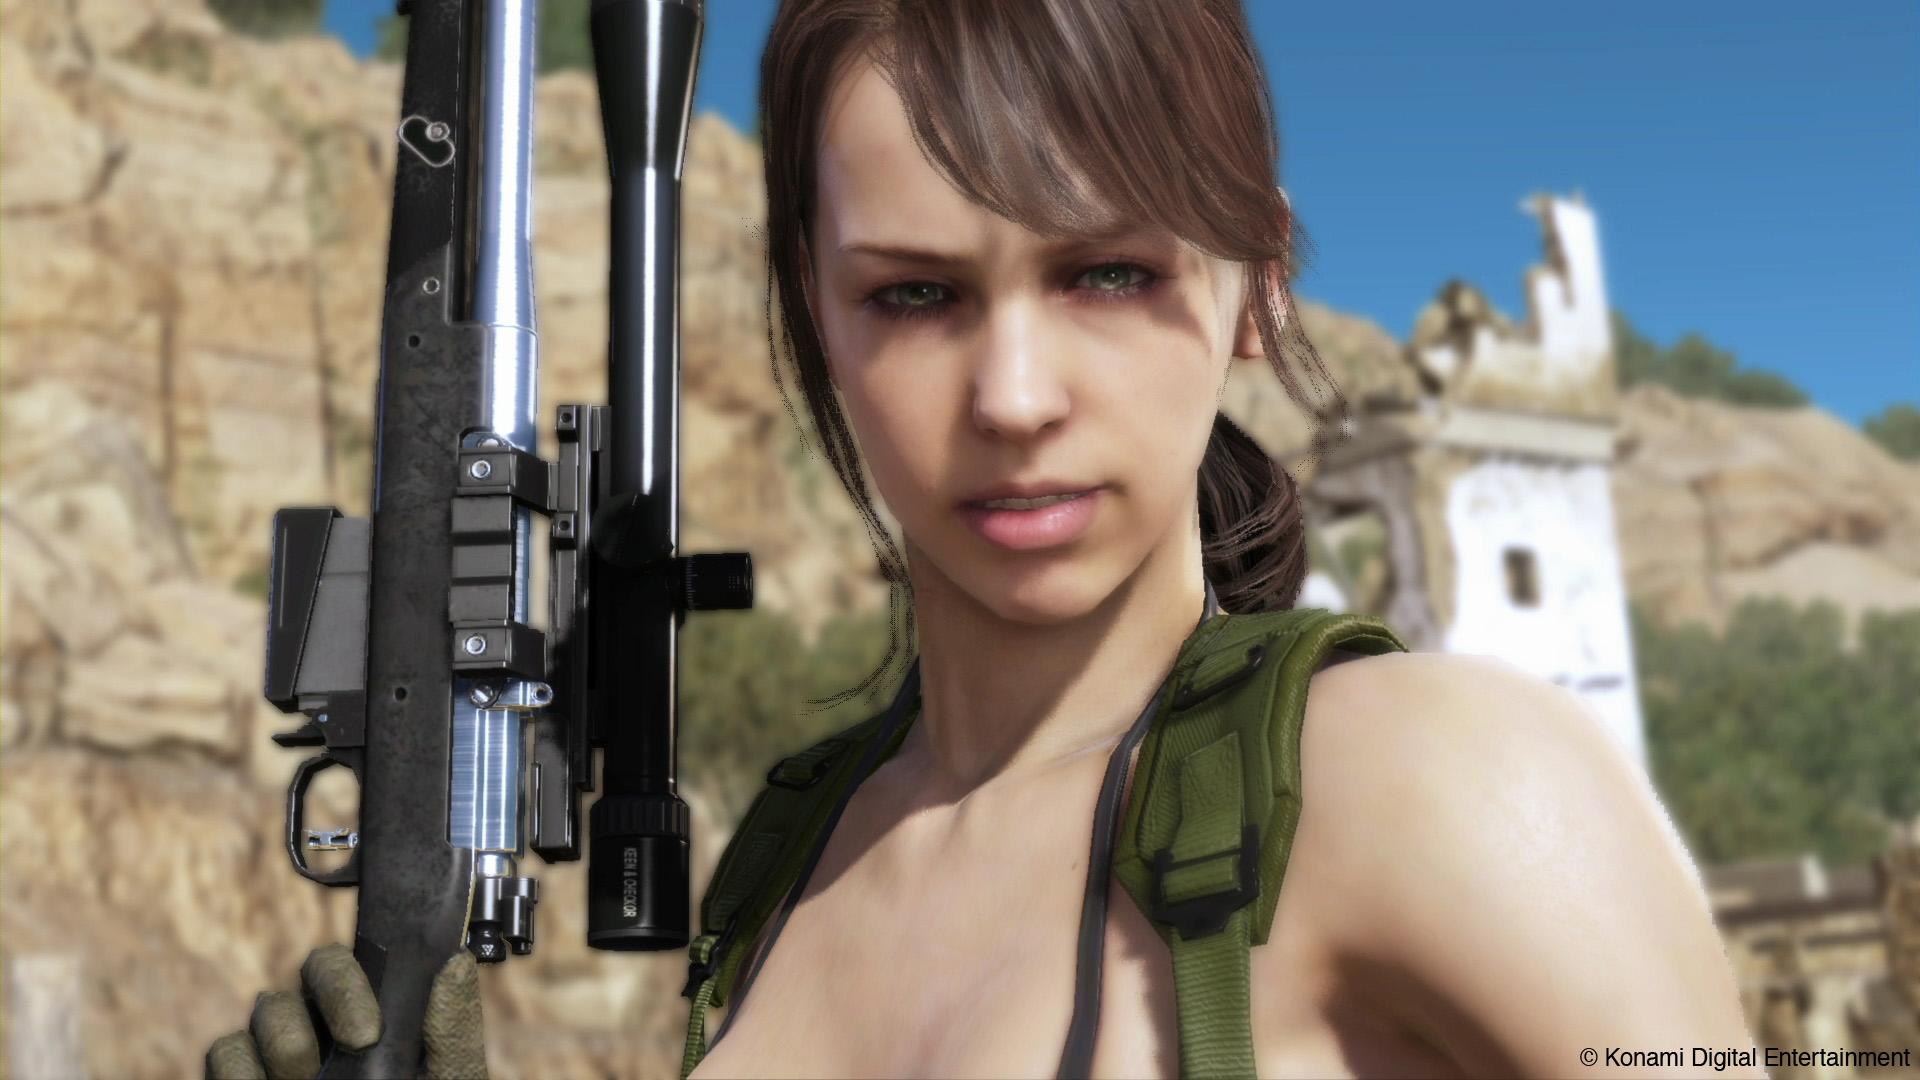 S&S; News: Metal Gear Solid V Has a 'Vast' Multiplayer Mode